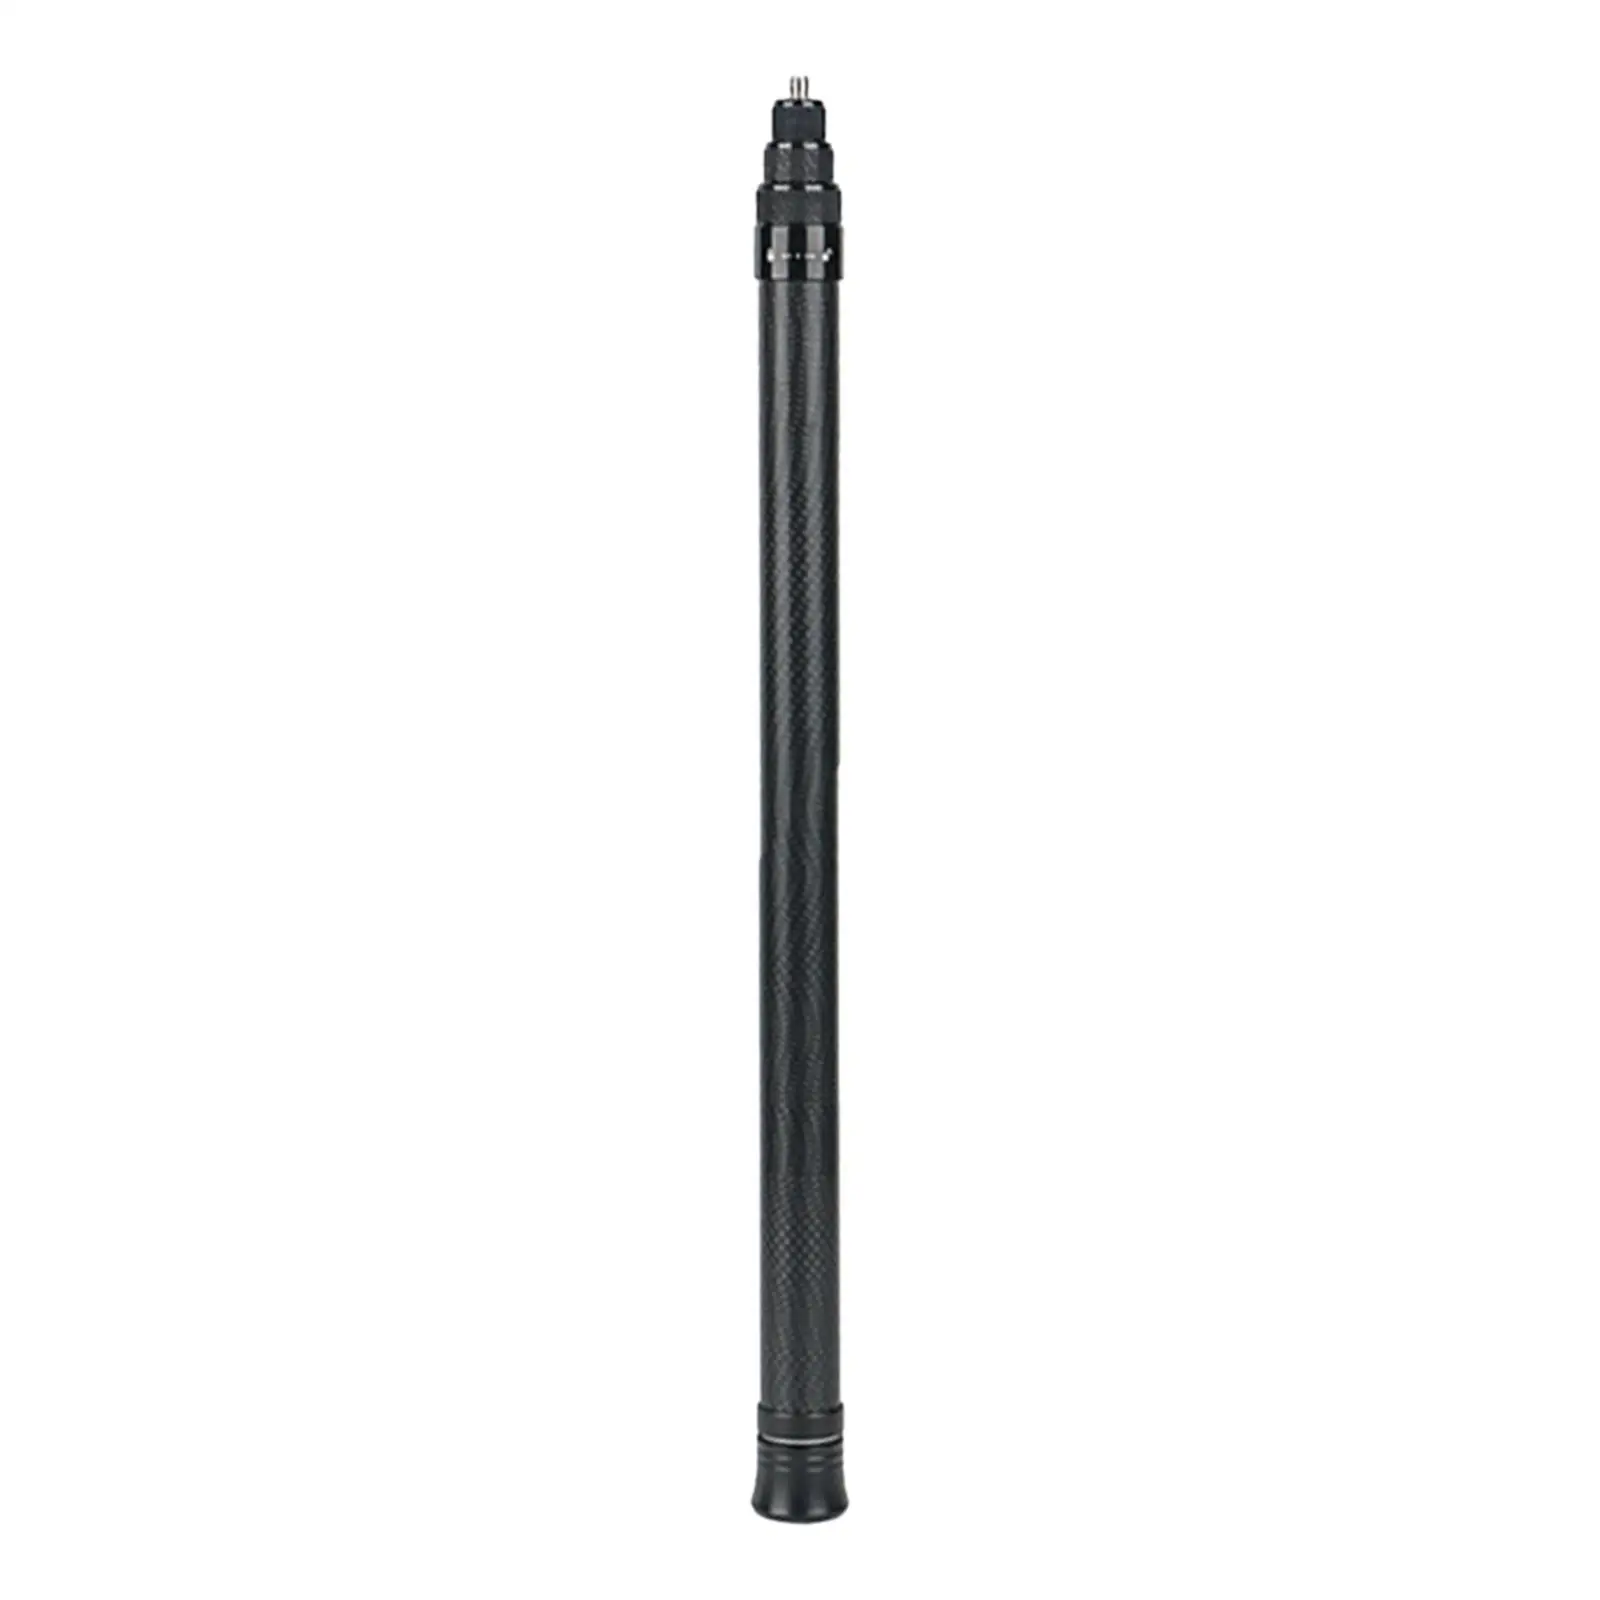 3M Selfie Stick Pole Strong Load Bearing Durable Firmly Connected Telescopic Design Carbon Fiber Monopod for Outdoor Activities